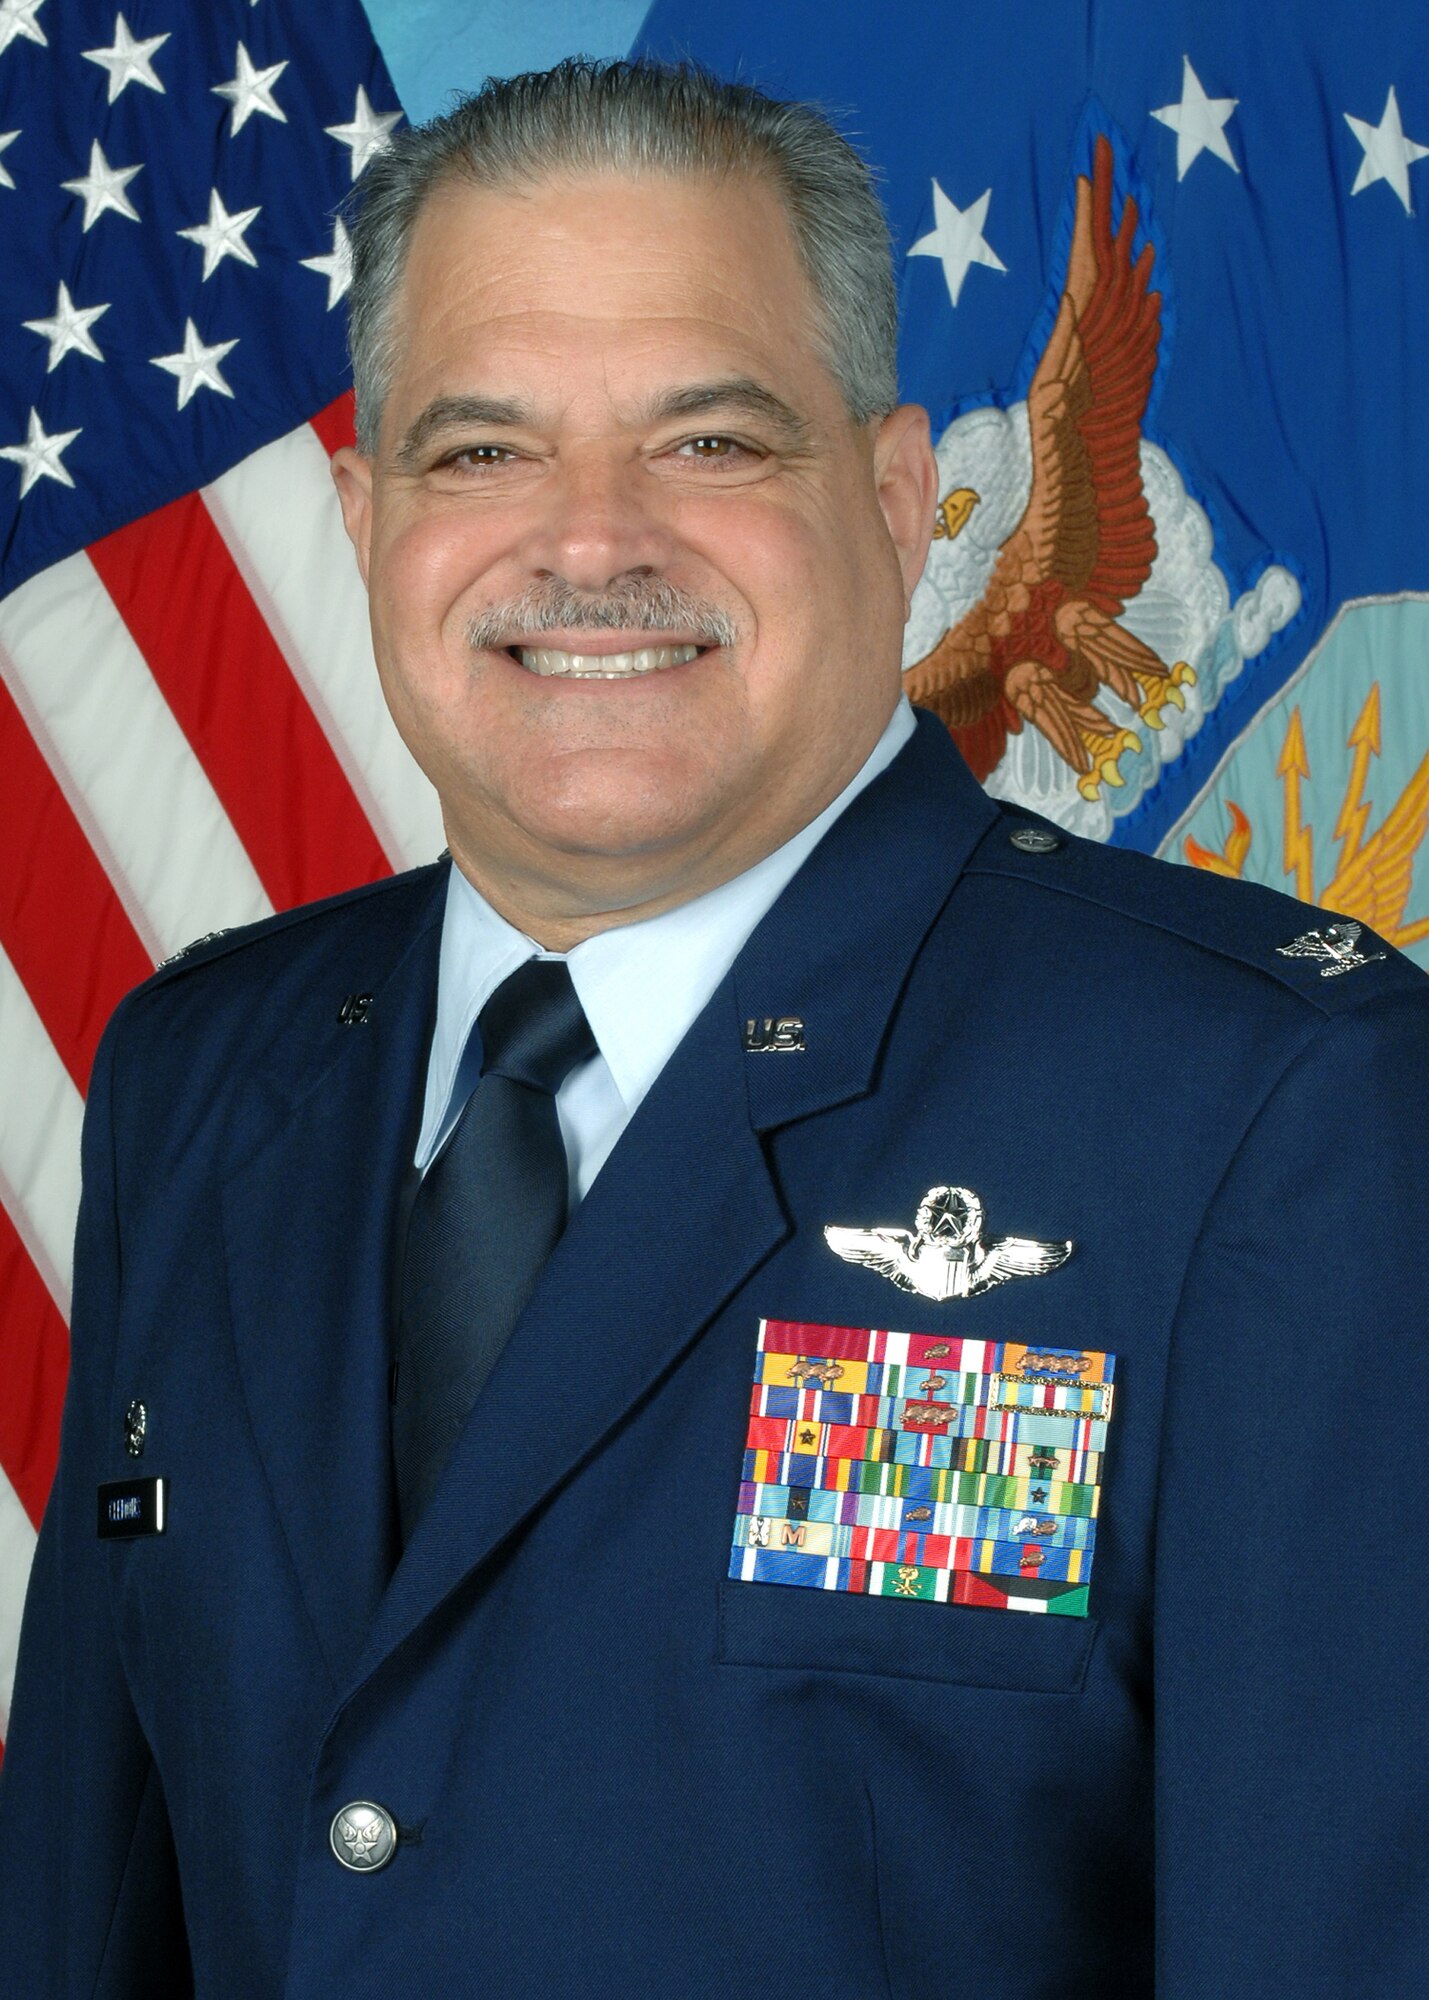 Col. Mark Clemons took command of the 442nd Fighter Wing Aug. 2, 2008.  He leads a fully combat-capable, Air Force Reserve A-10 wing based at Whiteman Air Force Base, Mo.  (U.S. Air Force photo)